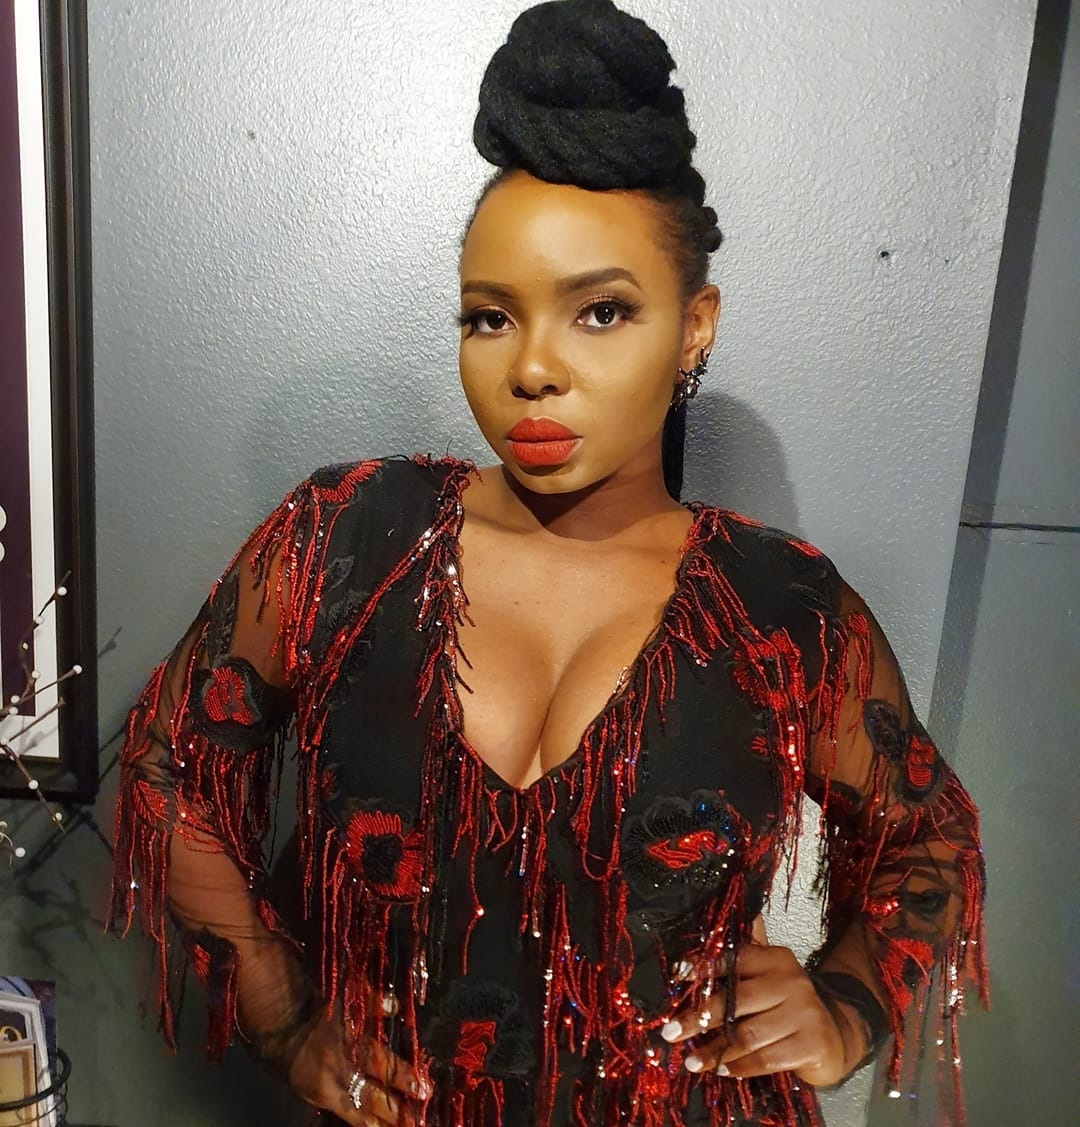 “Don’t cry, No one Cares! start smiling & they all get jealous” – Yemi Alade